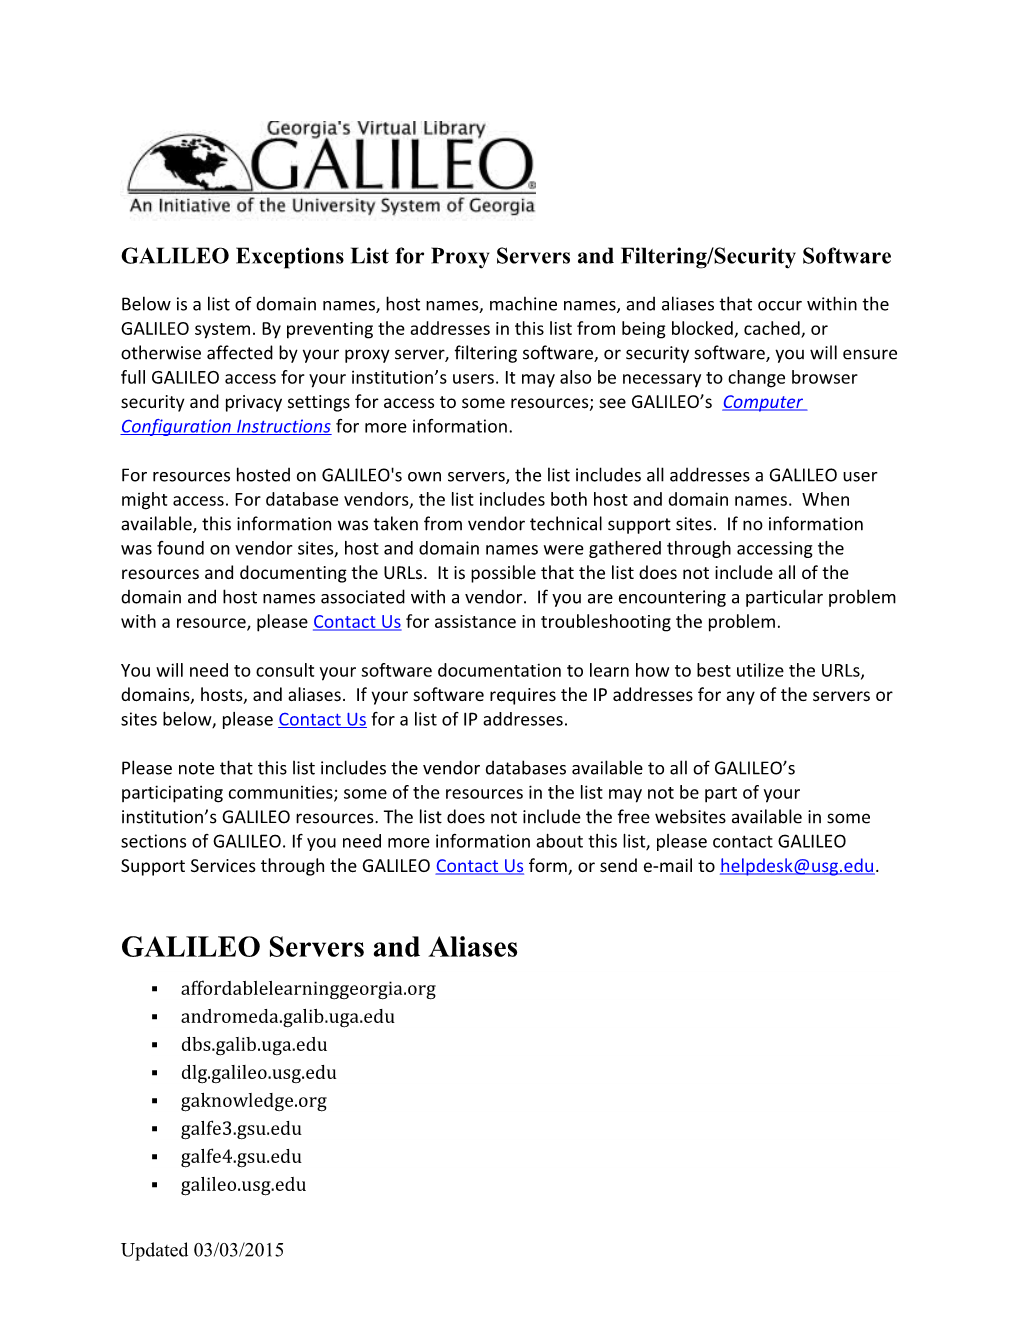 GALILEO Exceptions List for Proxy Servers and Filtering/Security Software